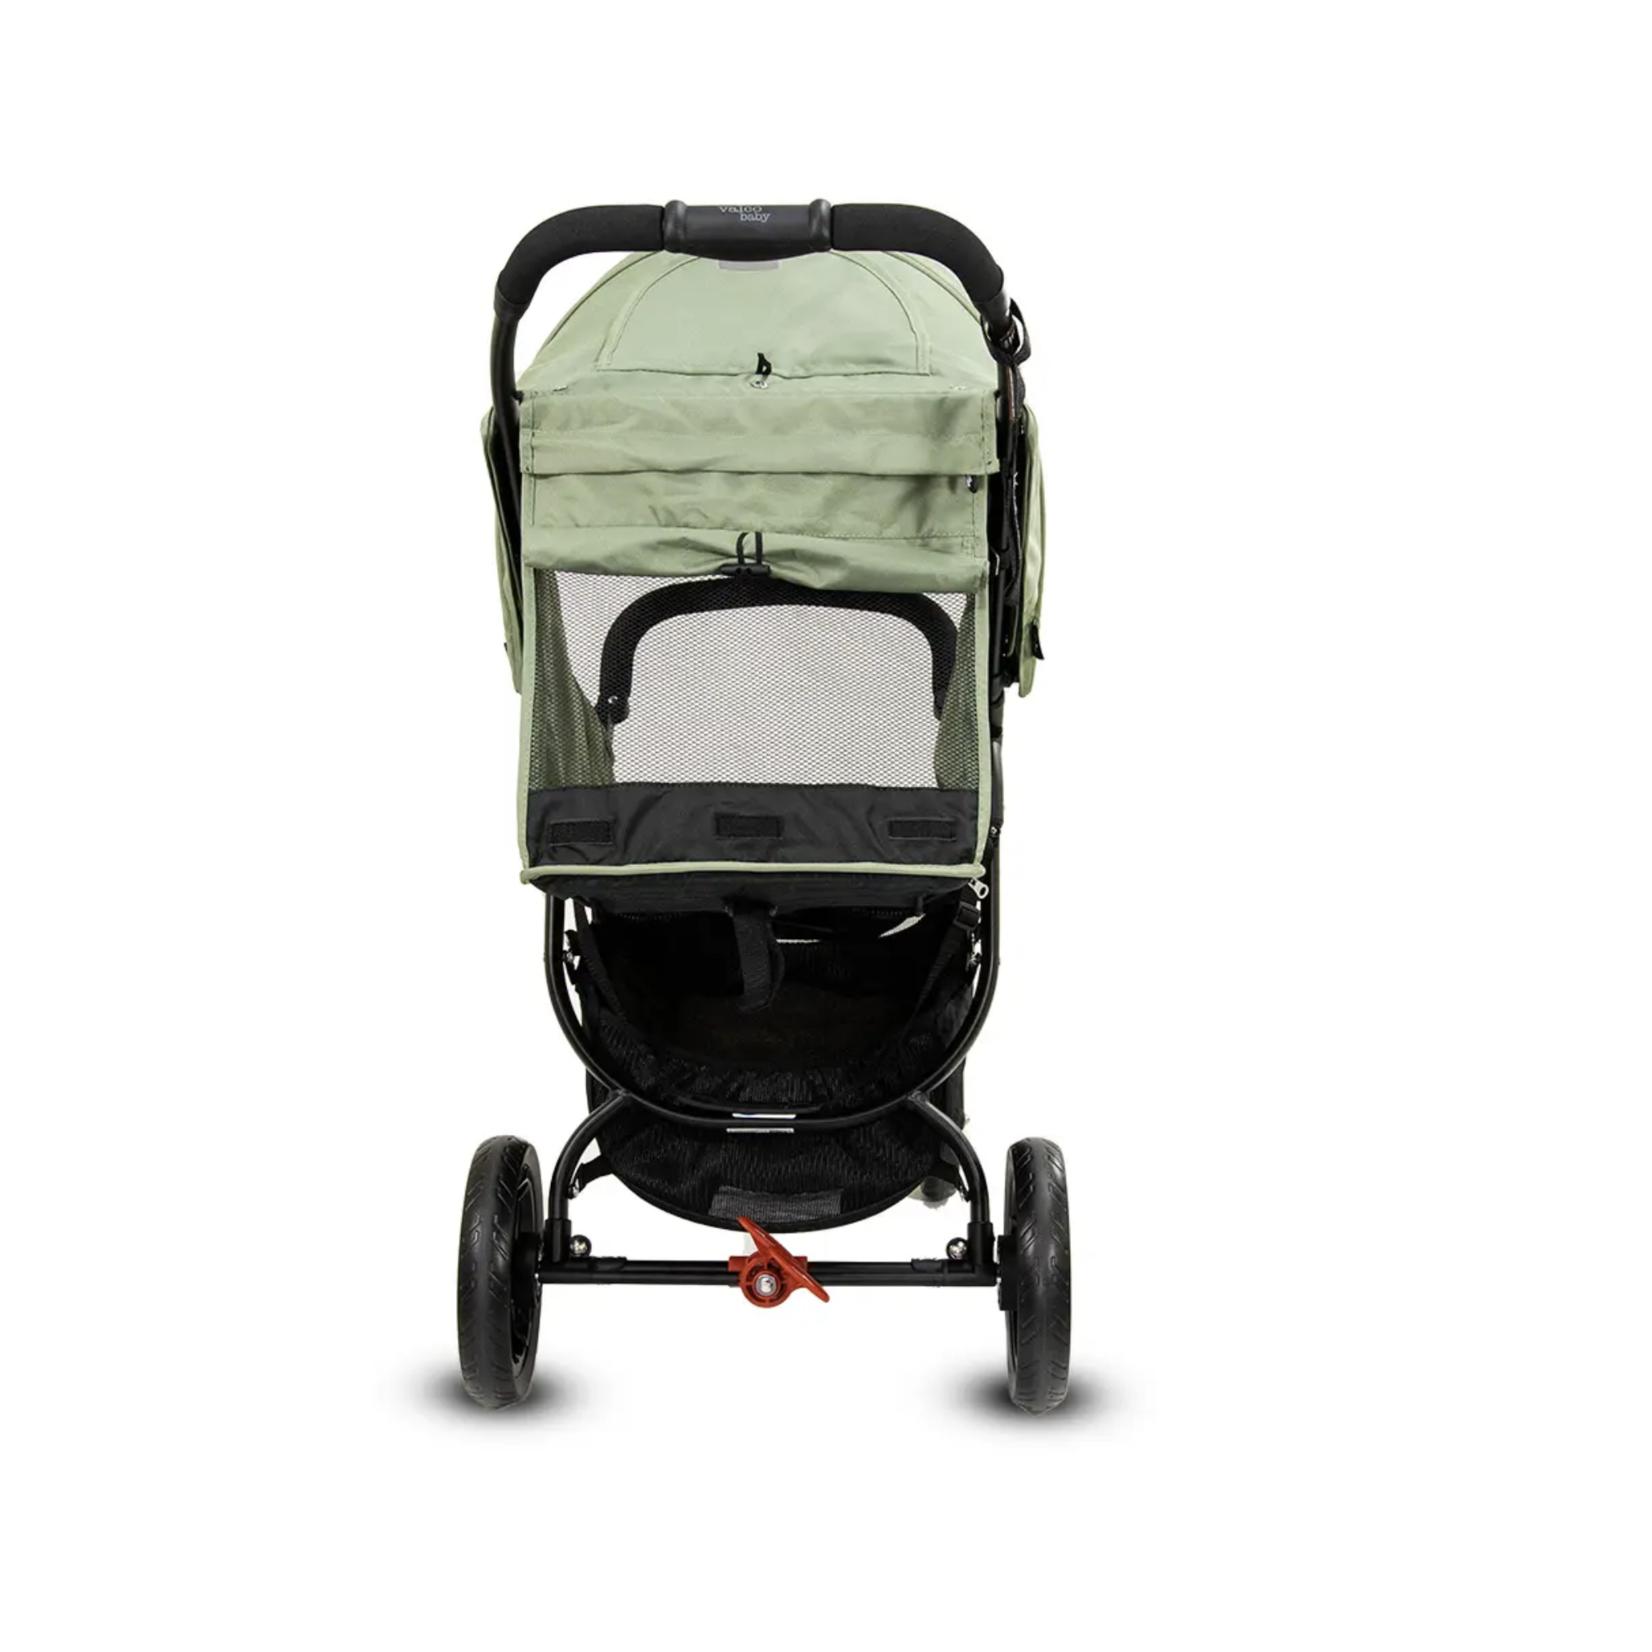 Valco Baby Snap 4 - Forest (N0169) Limited edition